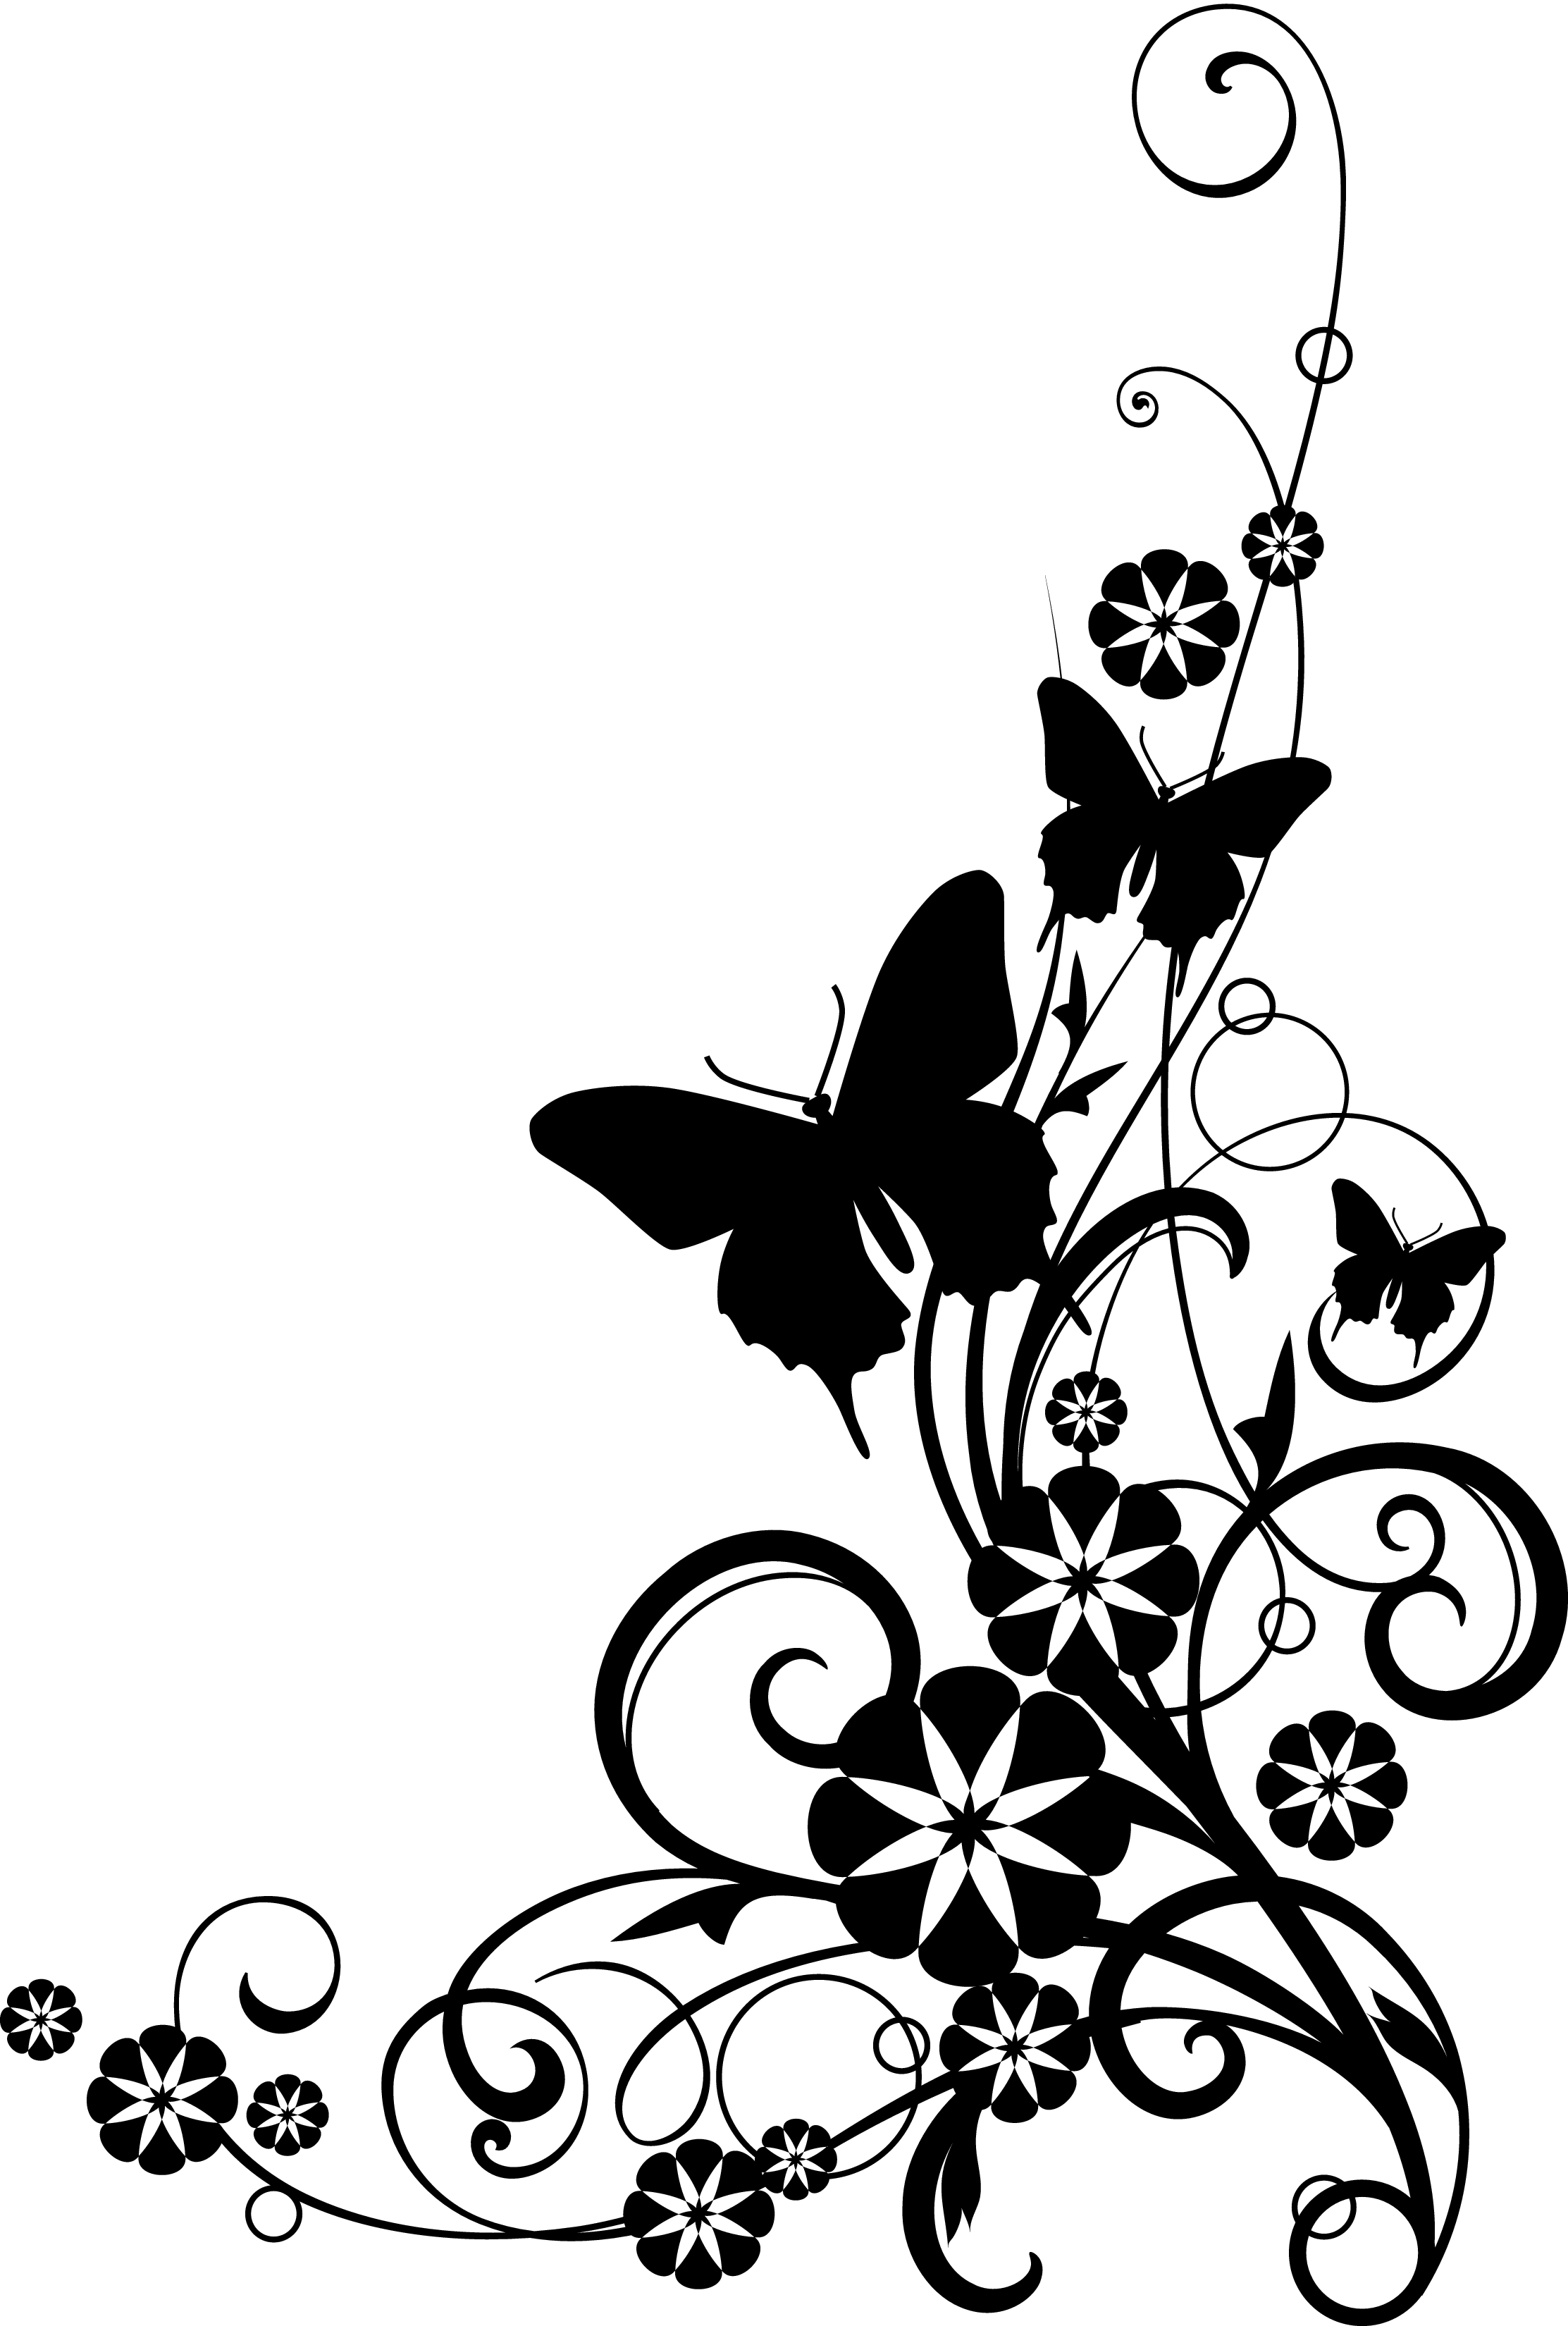 Flowers Border Clipart Black And White | Clipart Panda - Free ...